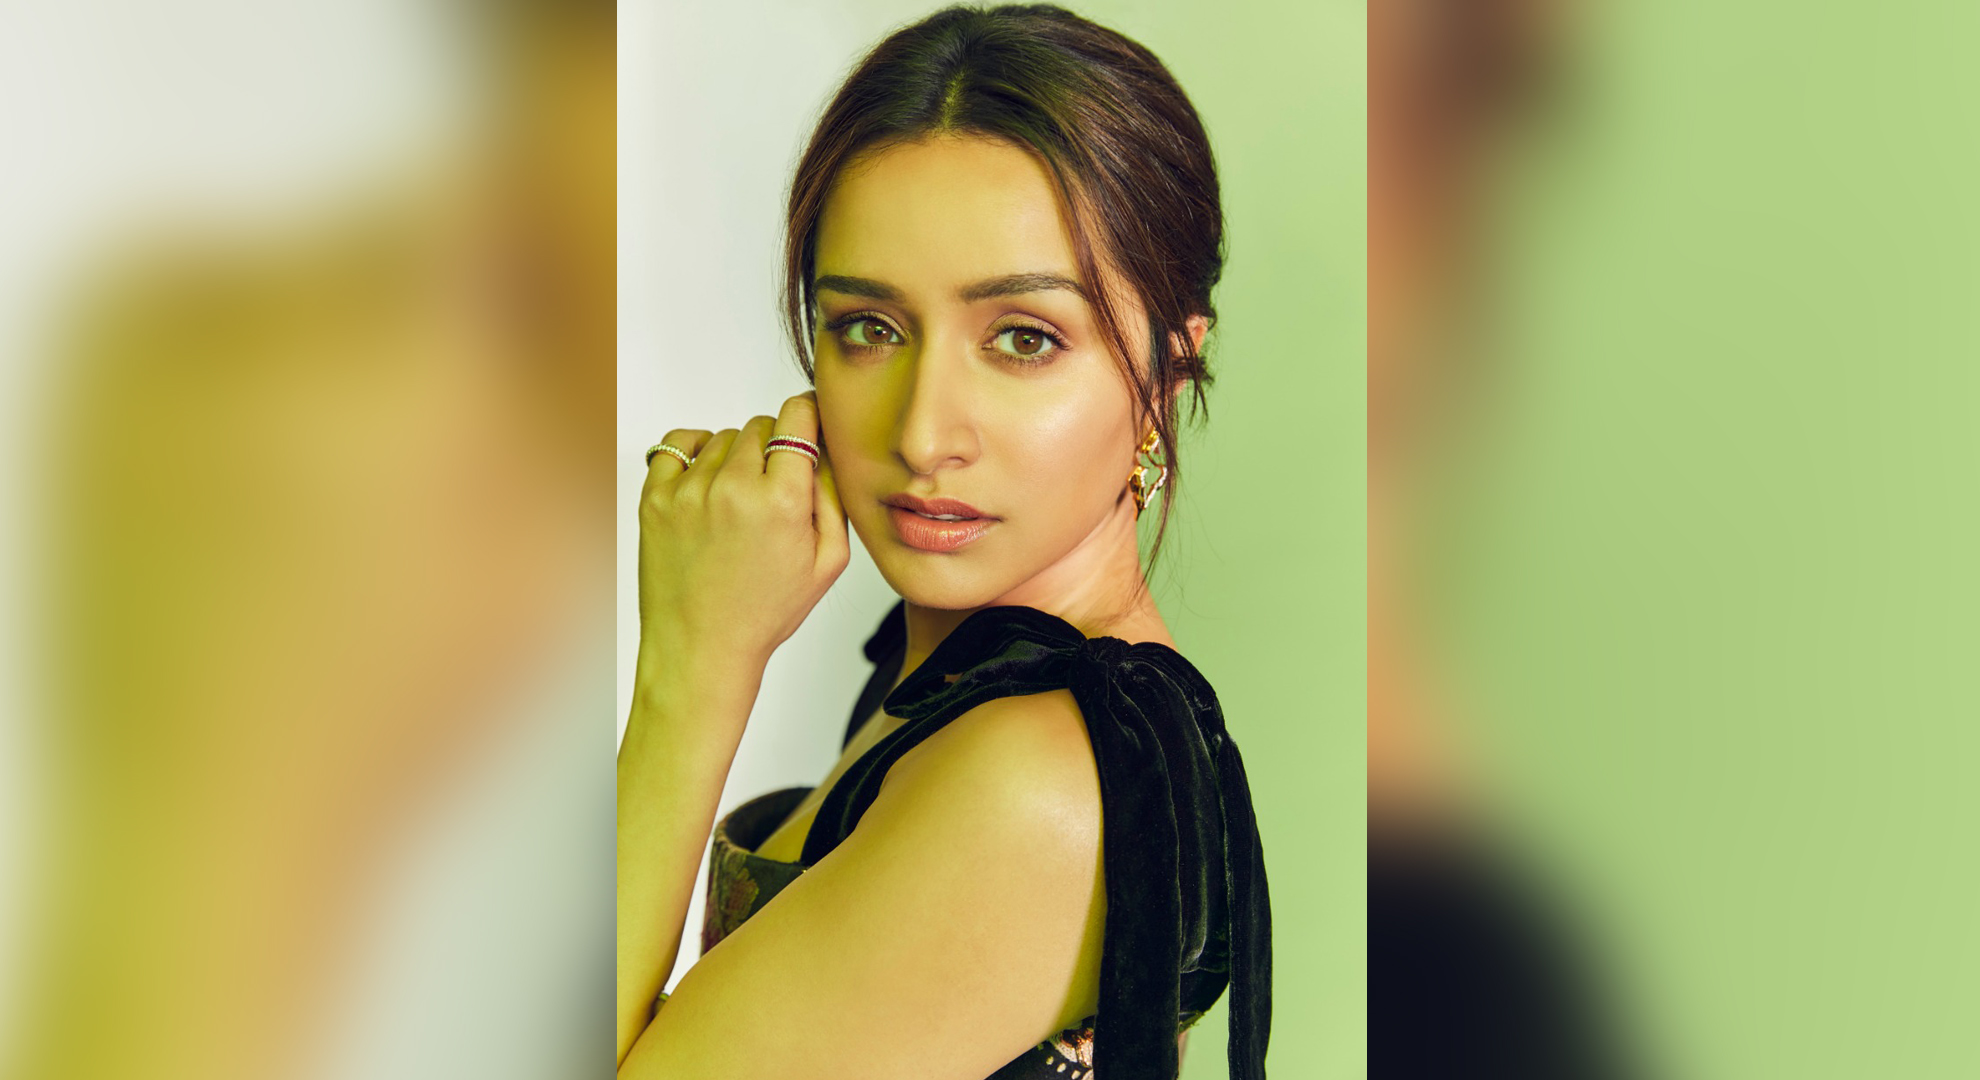 Shraddha Kapoor talks about how she wants to keep on pushing boundaries. Find out how she slays it!